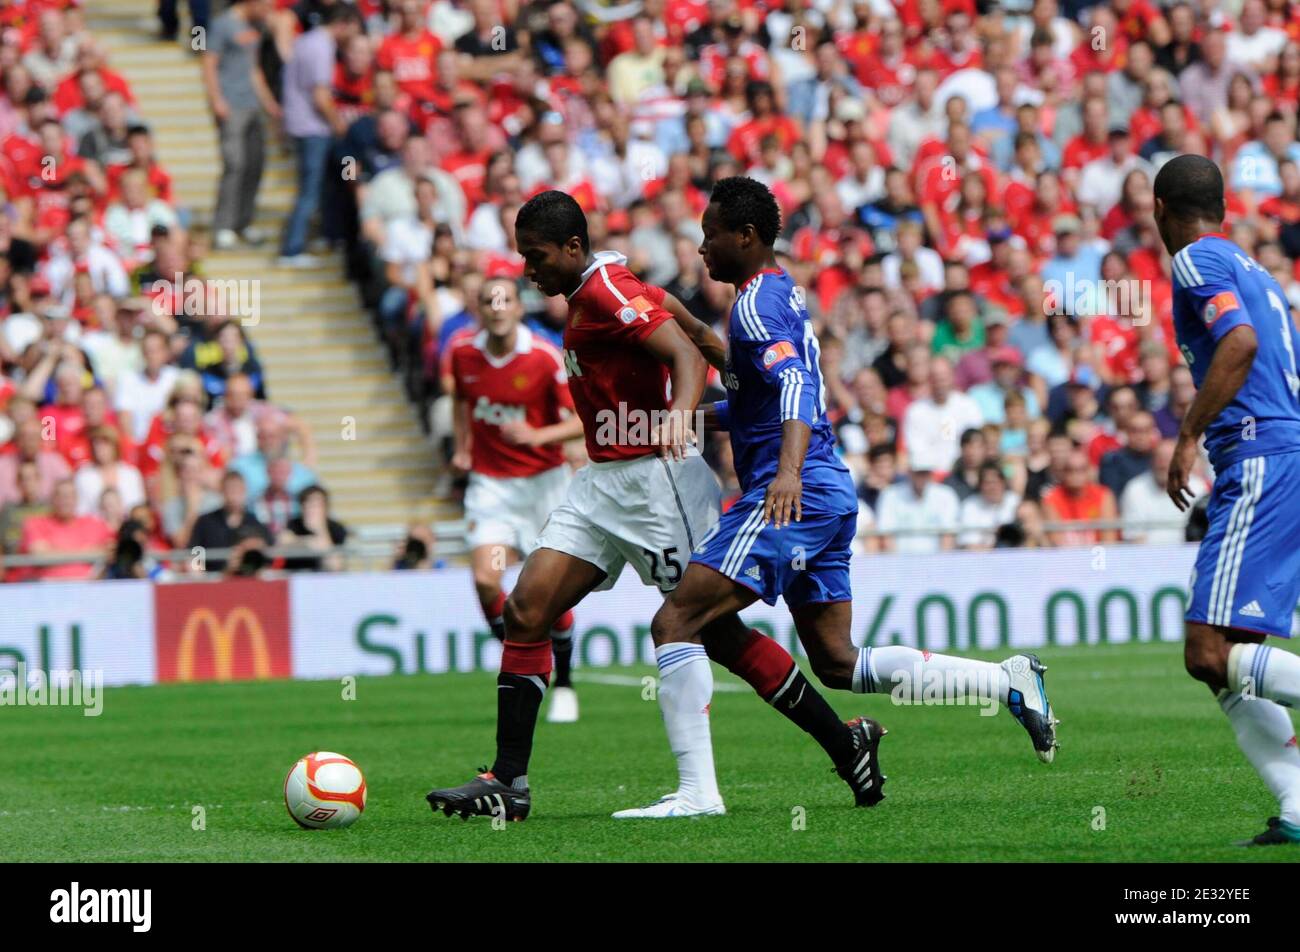 Chelsea's John Obi Mikel battles Manchester United's Antonio Valencia during the Community Shield 2010 Soccer match, Chelsea vs Manchester United at Wembley football stadium in London, UK, on August 8th, 2010. Manchester United won 3-1. Photo by Henri Szwarc/ABACAPRESS.COM Stock Photo